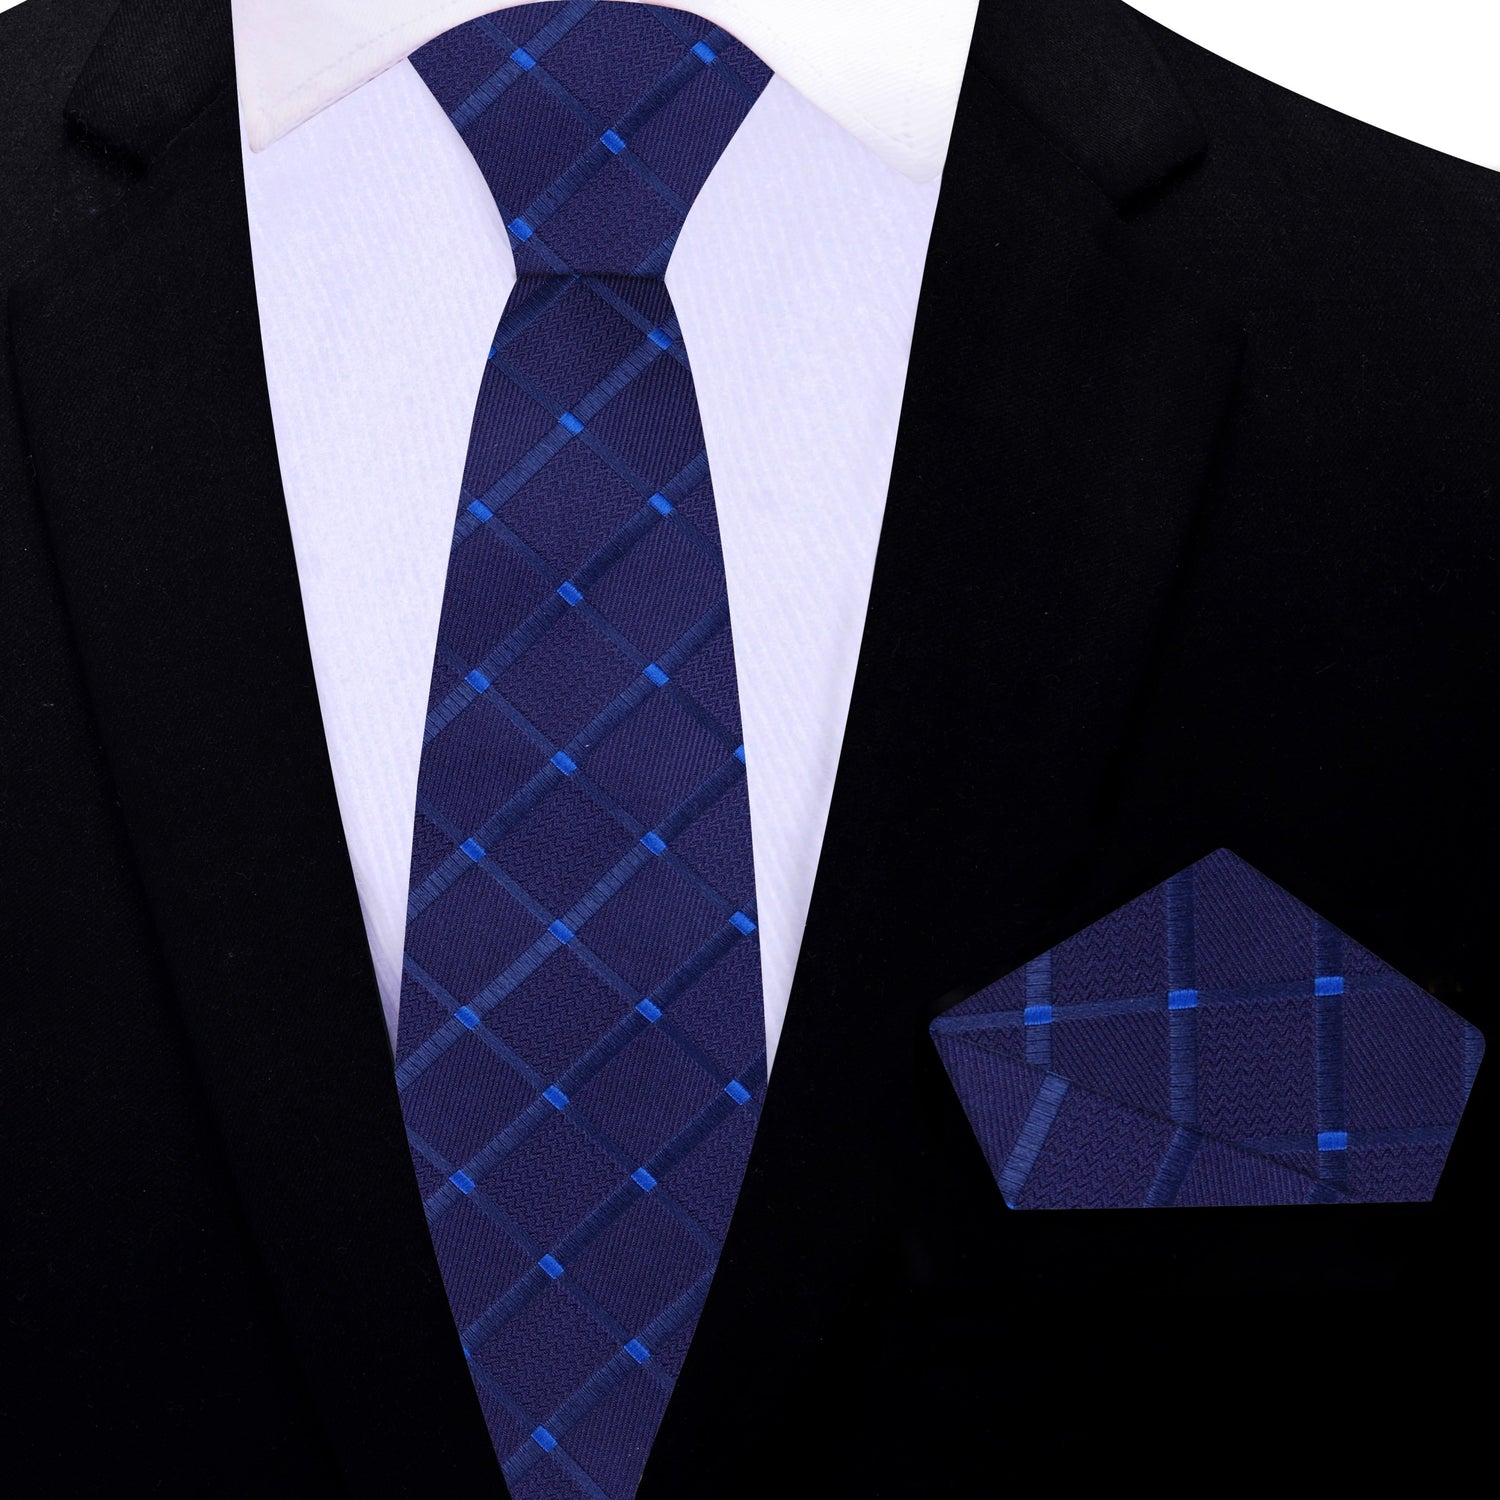 Thin Tie: Blue Necktie with a Geometric Texture and Matching Square